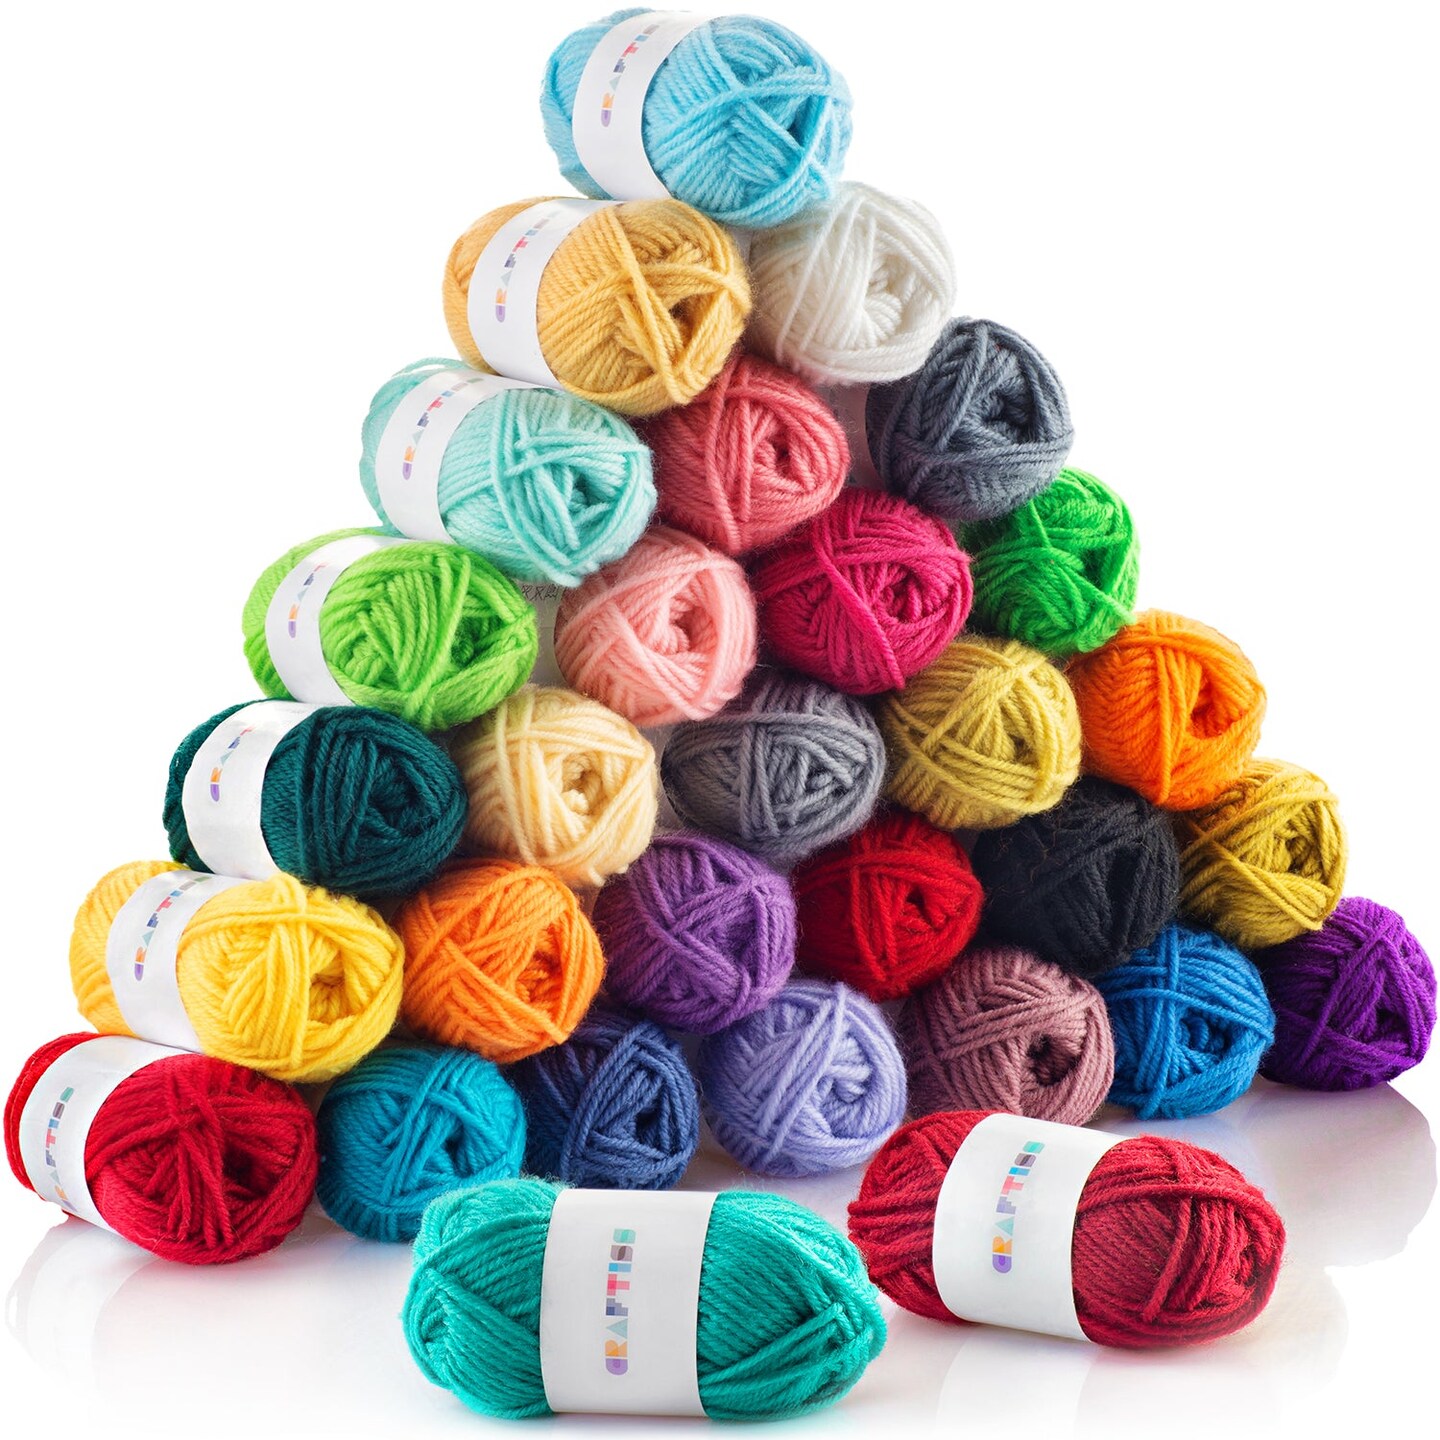 30 Acrylic Yarn Skeins Unique Colors - Bulk Yarn Kit - 1300 Yards - Perfect  for Any Mini Project